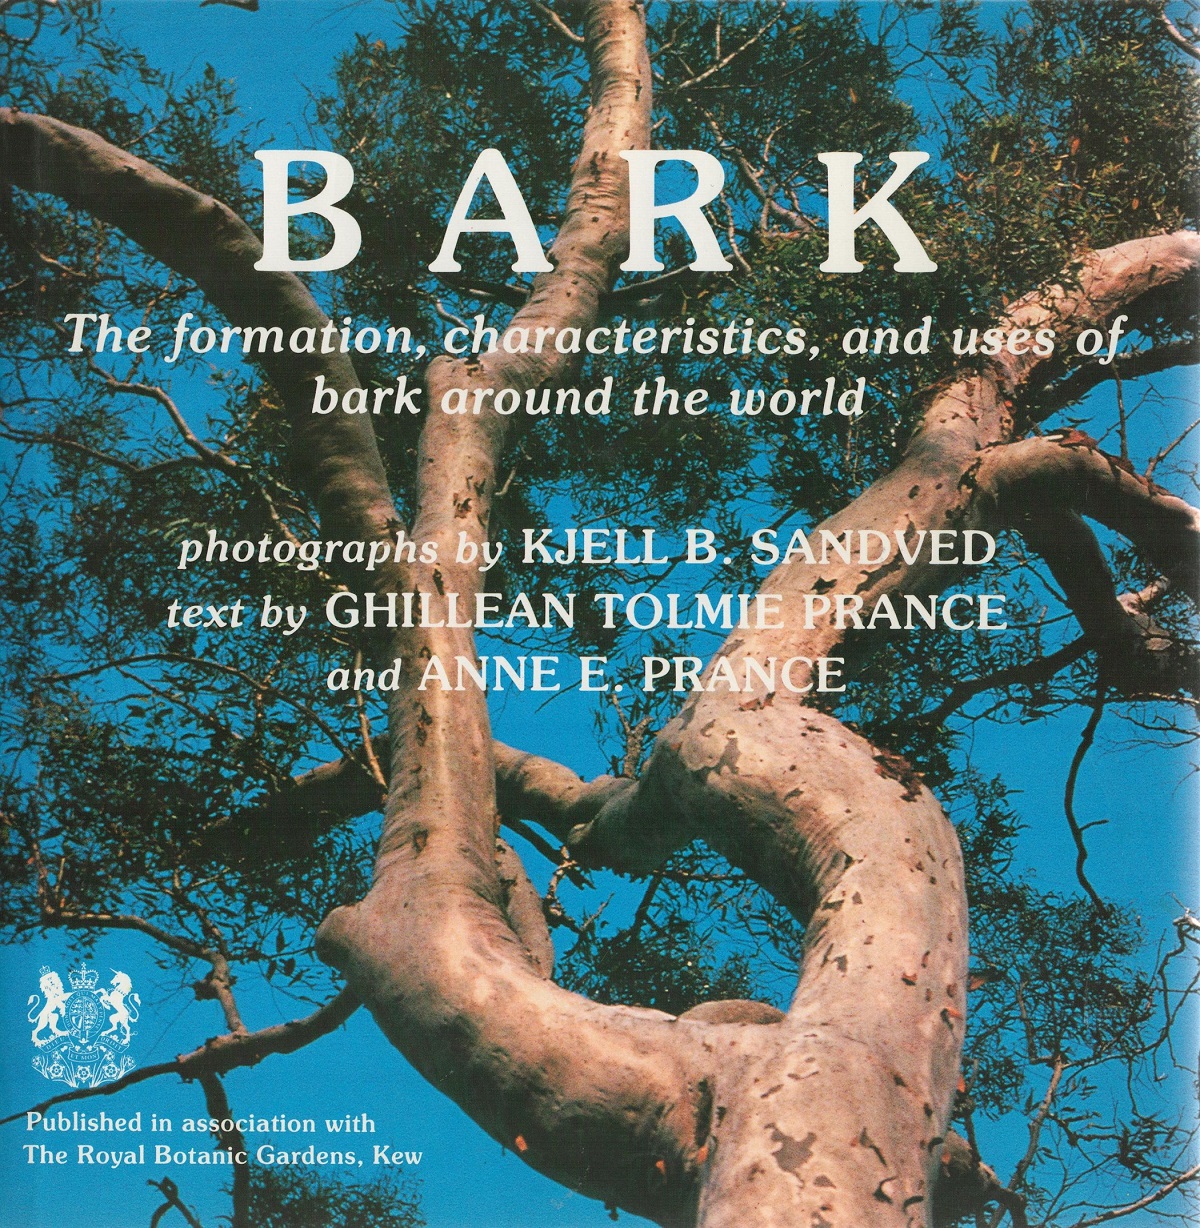 Bark The Formation, Characteristics, and uses of Bark Around the World by G T and A E Prance